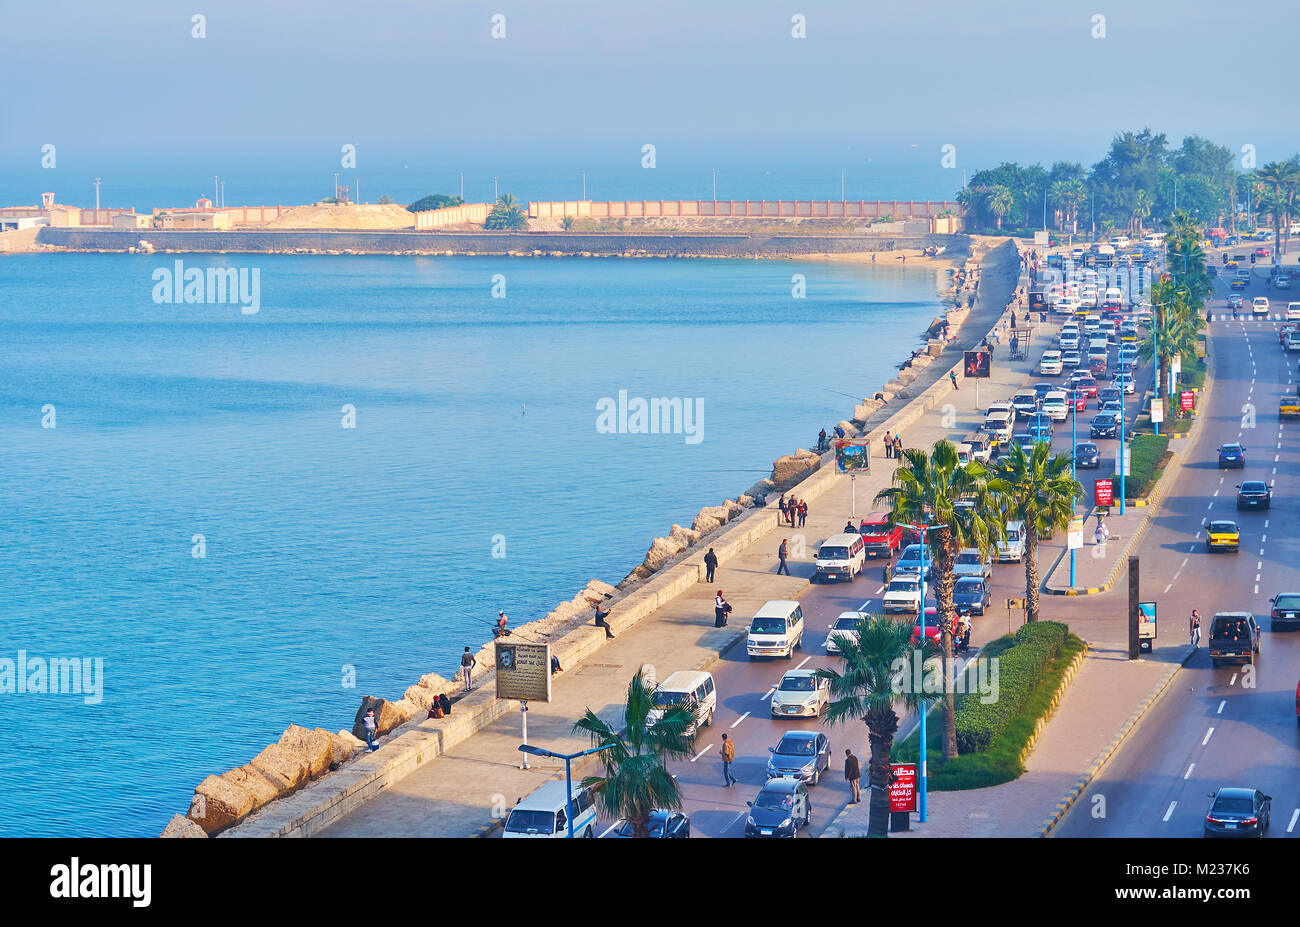 ALEXANDRIA, EGYPT - DECEMBER 17, 2017: The foggy Corniche embankment in the early morning, transport ride along the road and people walk on the seasid Stock Photo